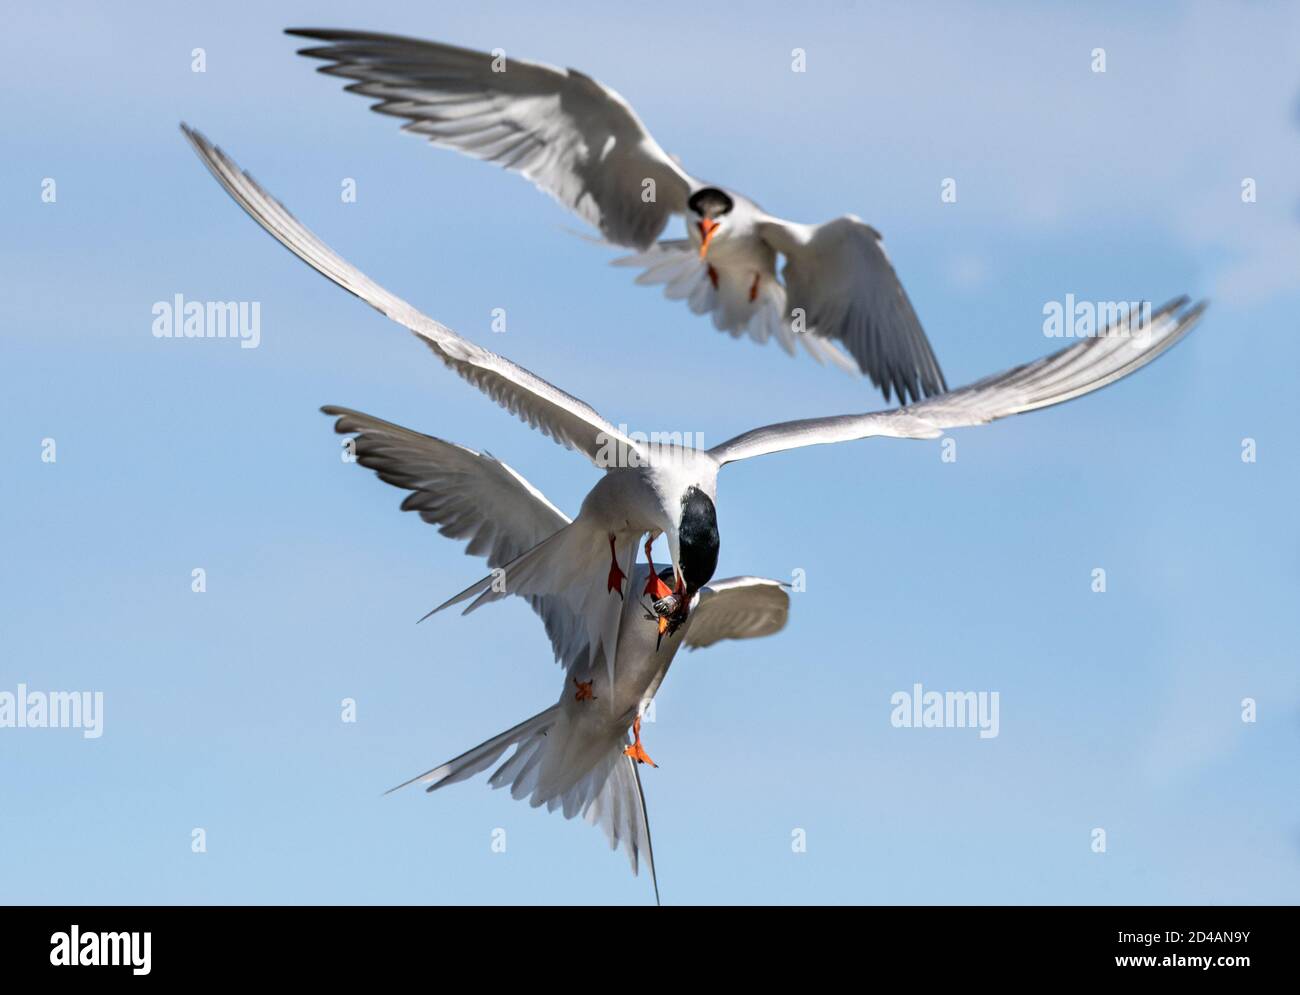 Showdown in flight, fight for fish. Common Terns interacting in flight. Adult common terns in flight  in sunset light on the sky background. Scientifi Stock Photo